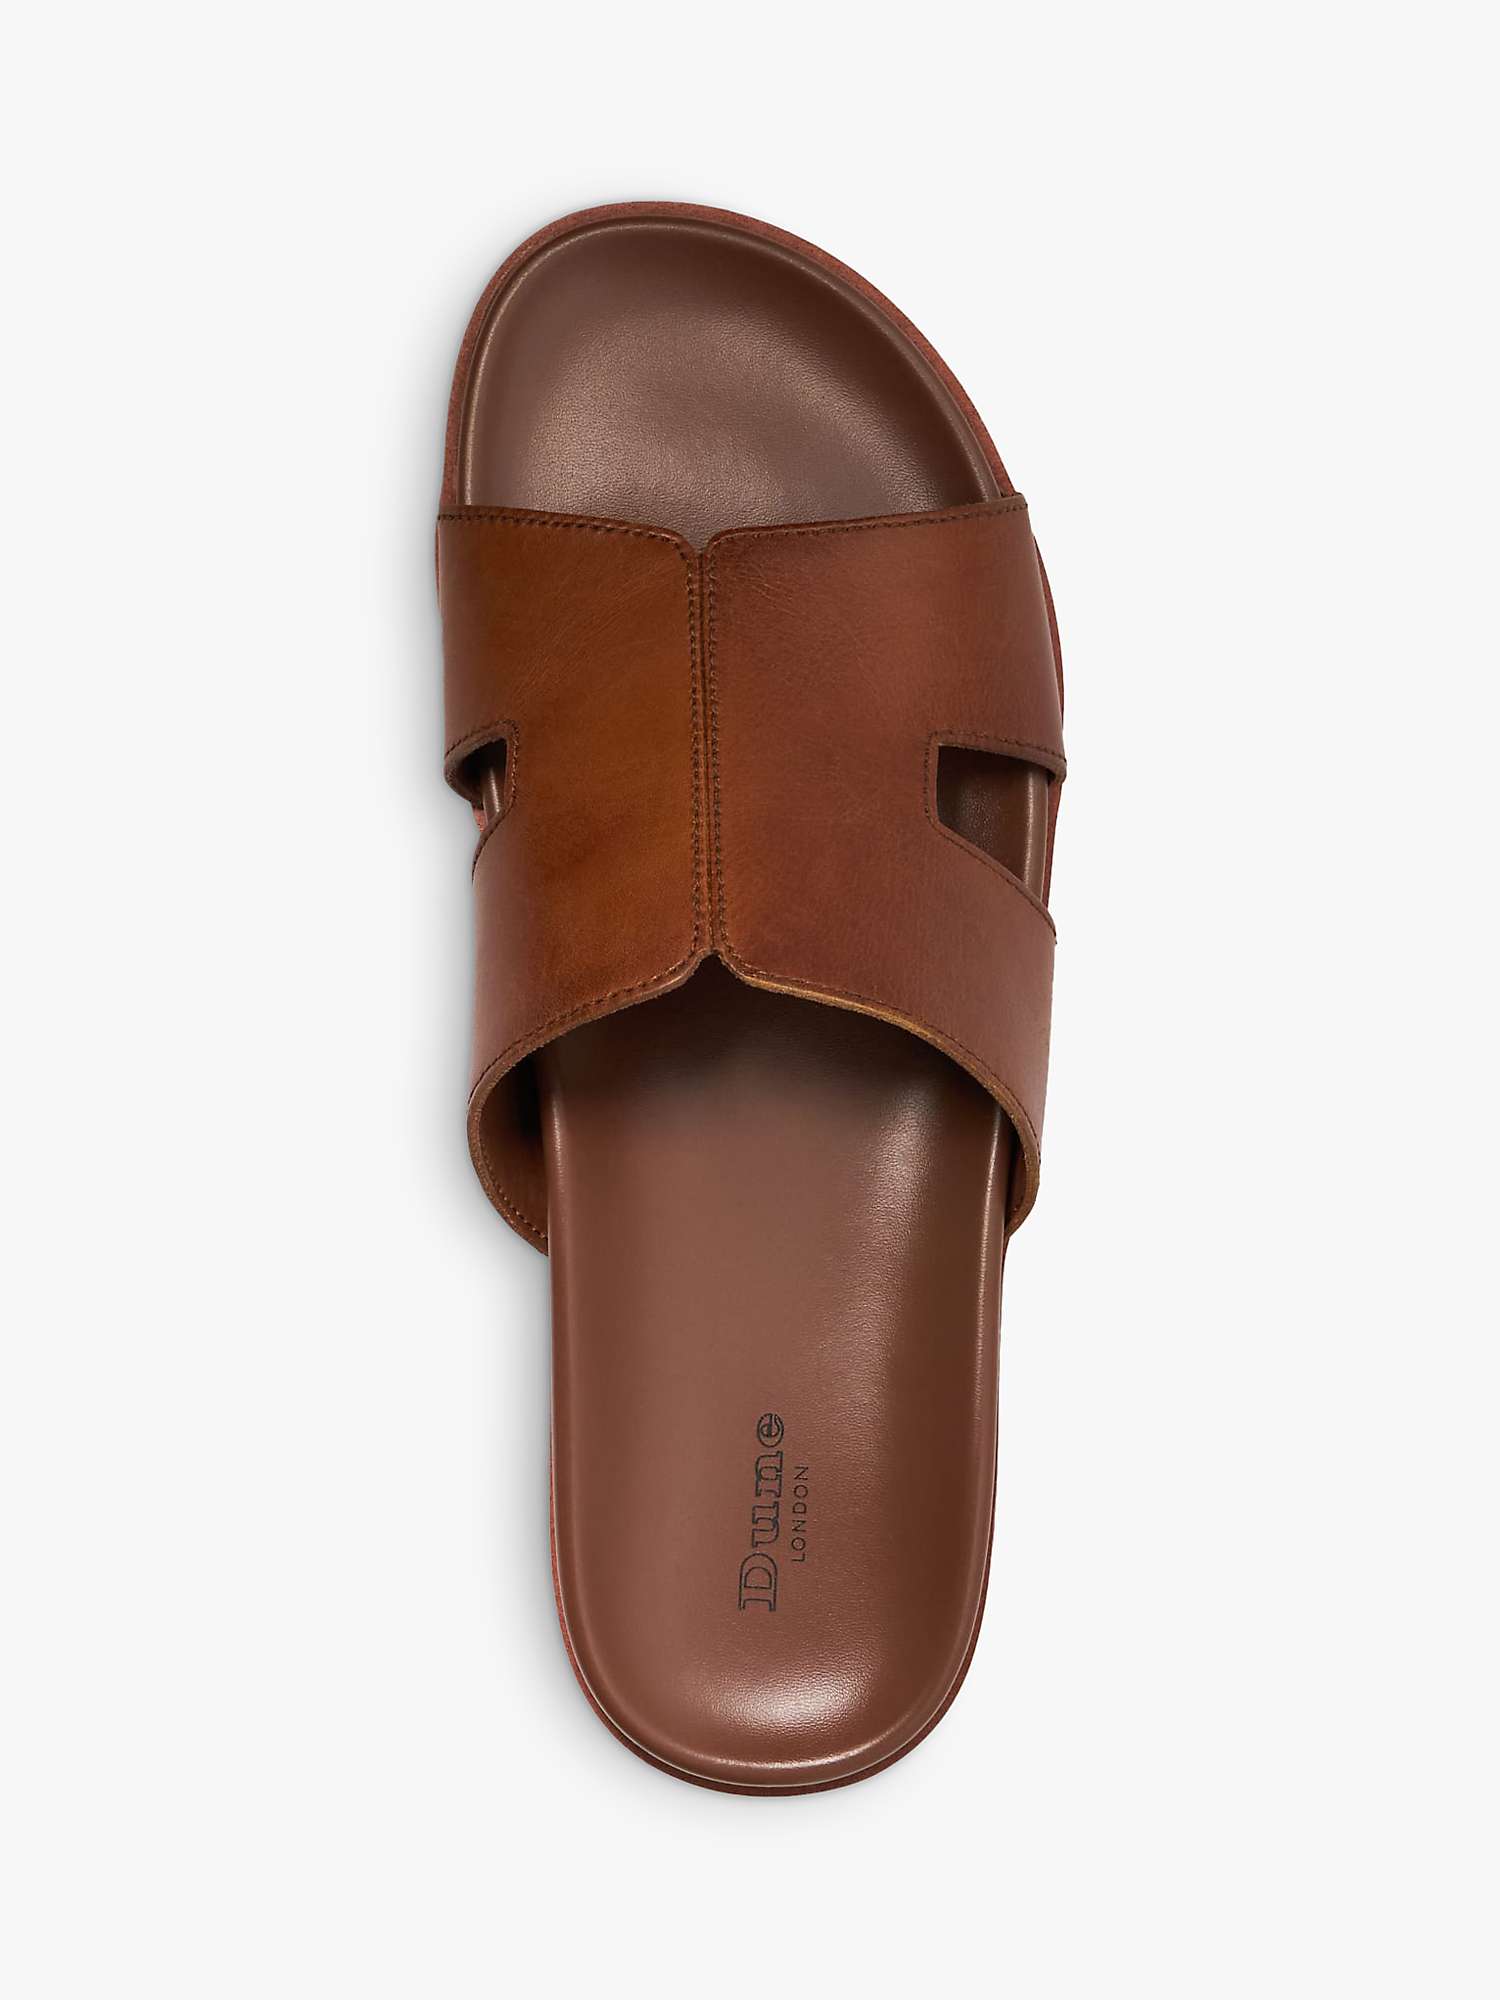 Buy Dune Insight Chunky Sole Sandals, Tan Online at johnlewis.com